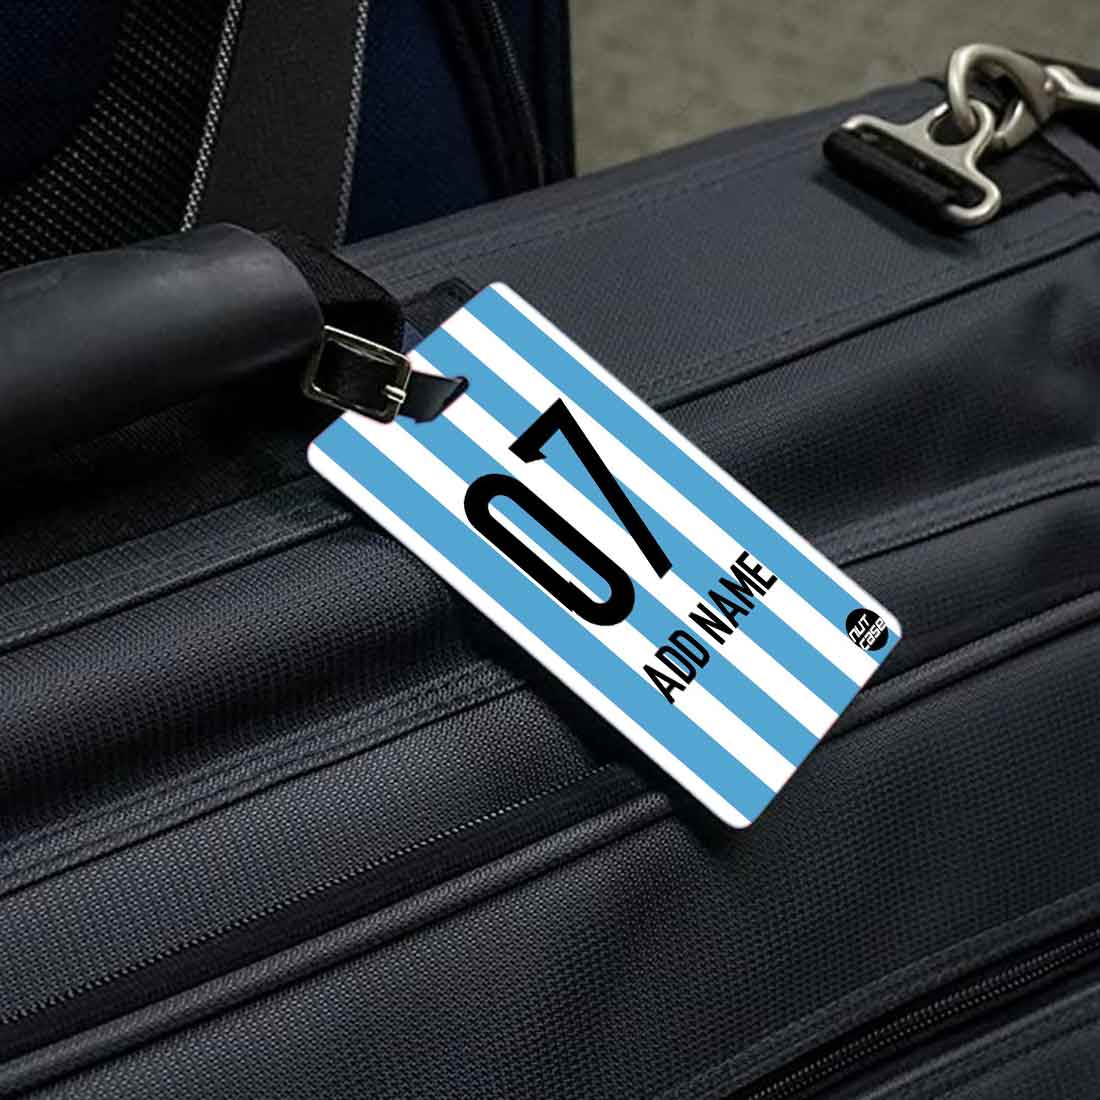 Custom Printed Bag Tags Set of 2 for Sports - Argentina Jersey